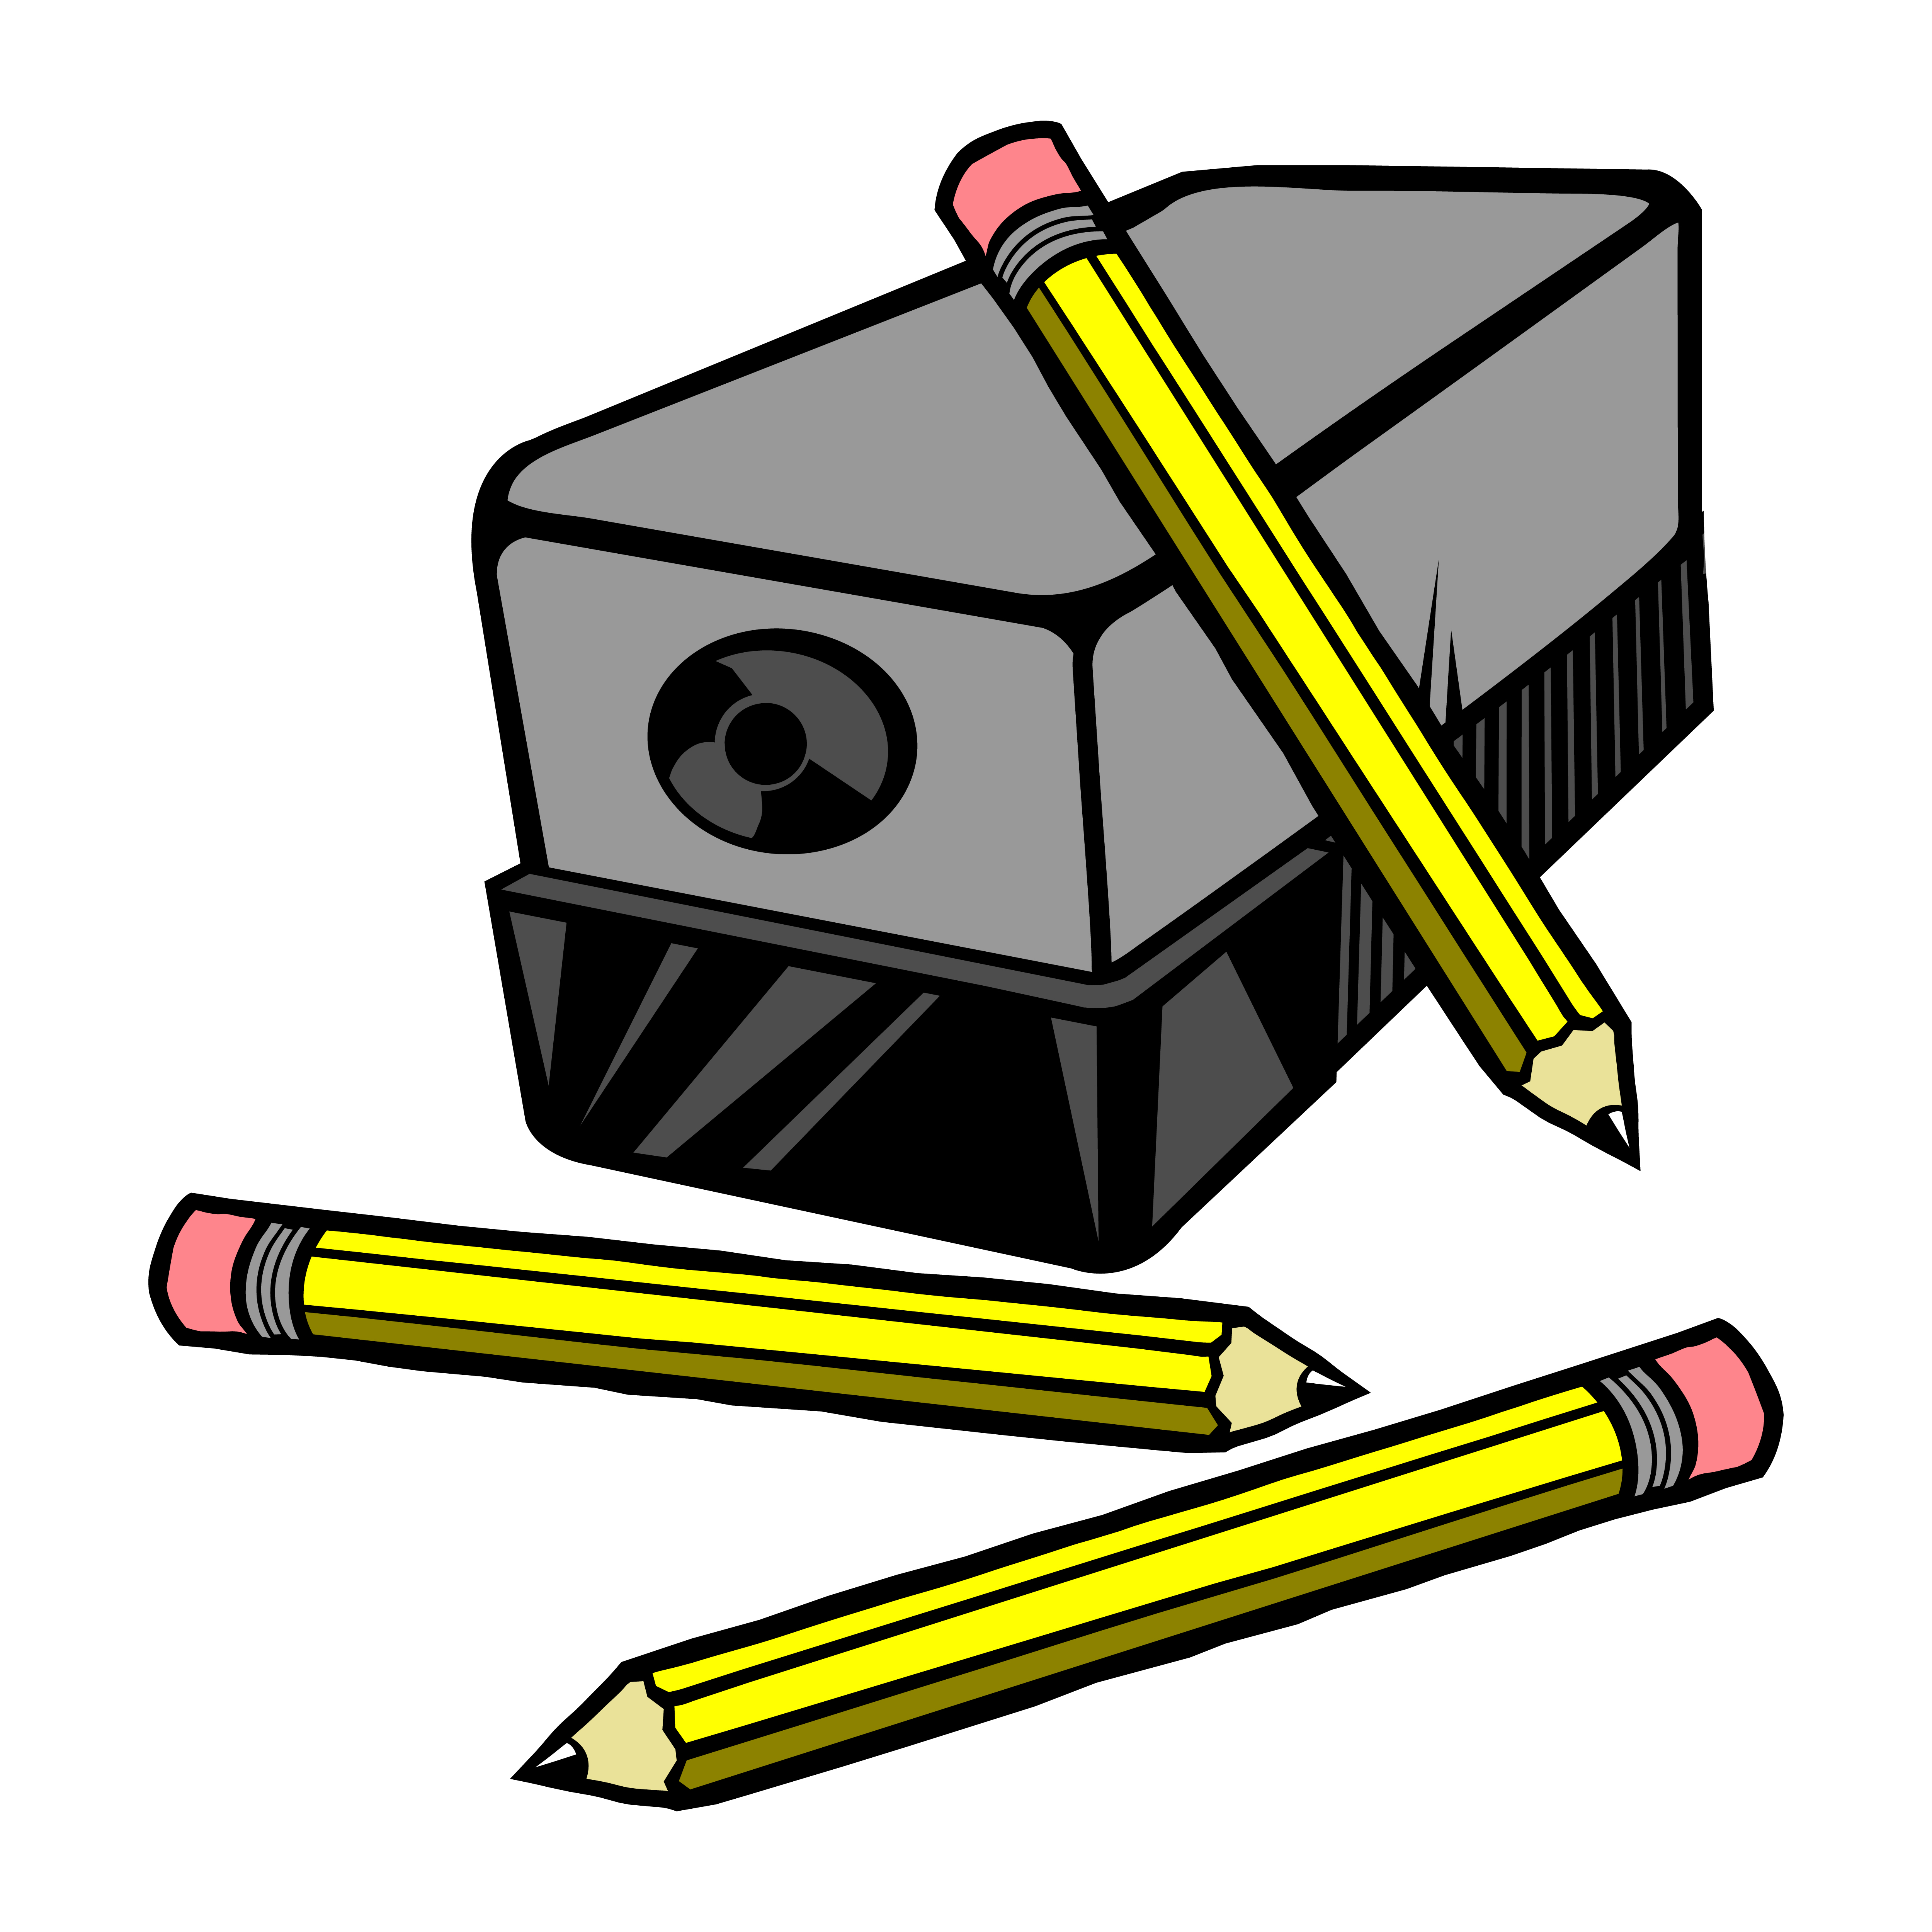 Vector illustration of an electric pencil sharpener with pencils